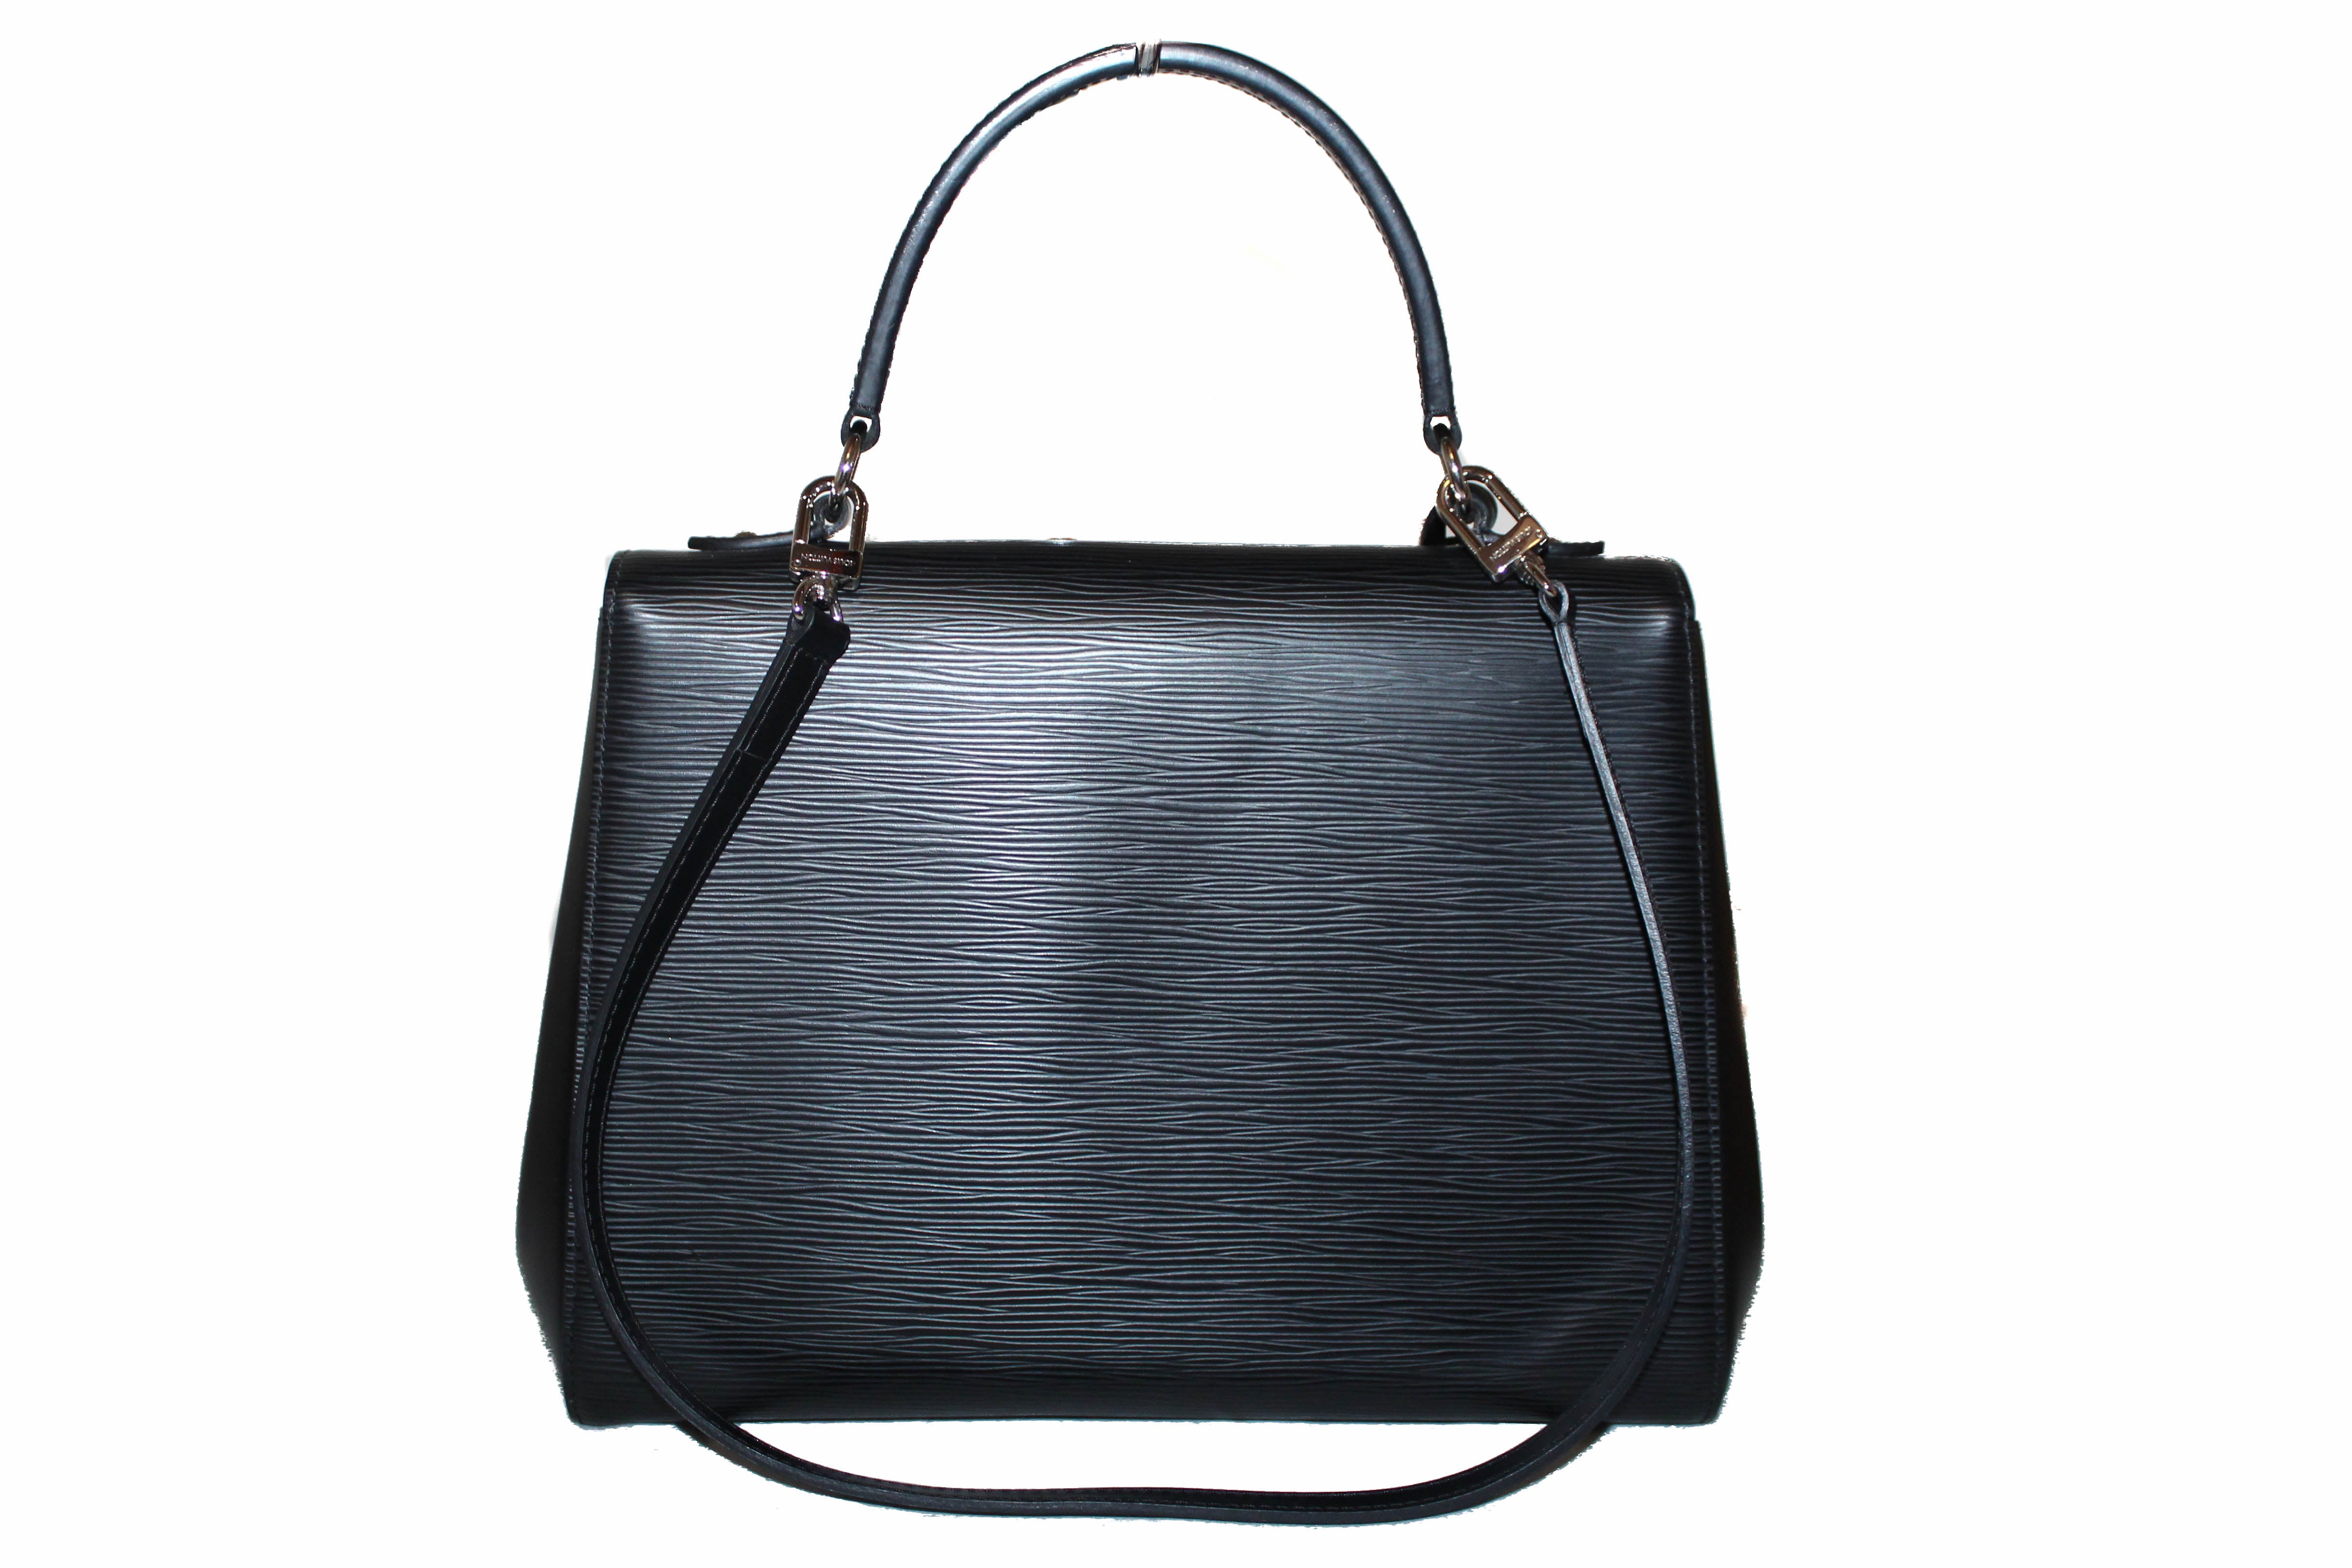 Cluny BB bag in black epi leather Louis Vuitton - Second Hand